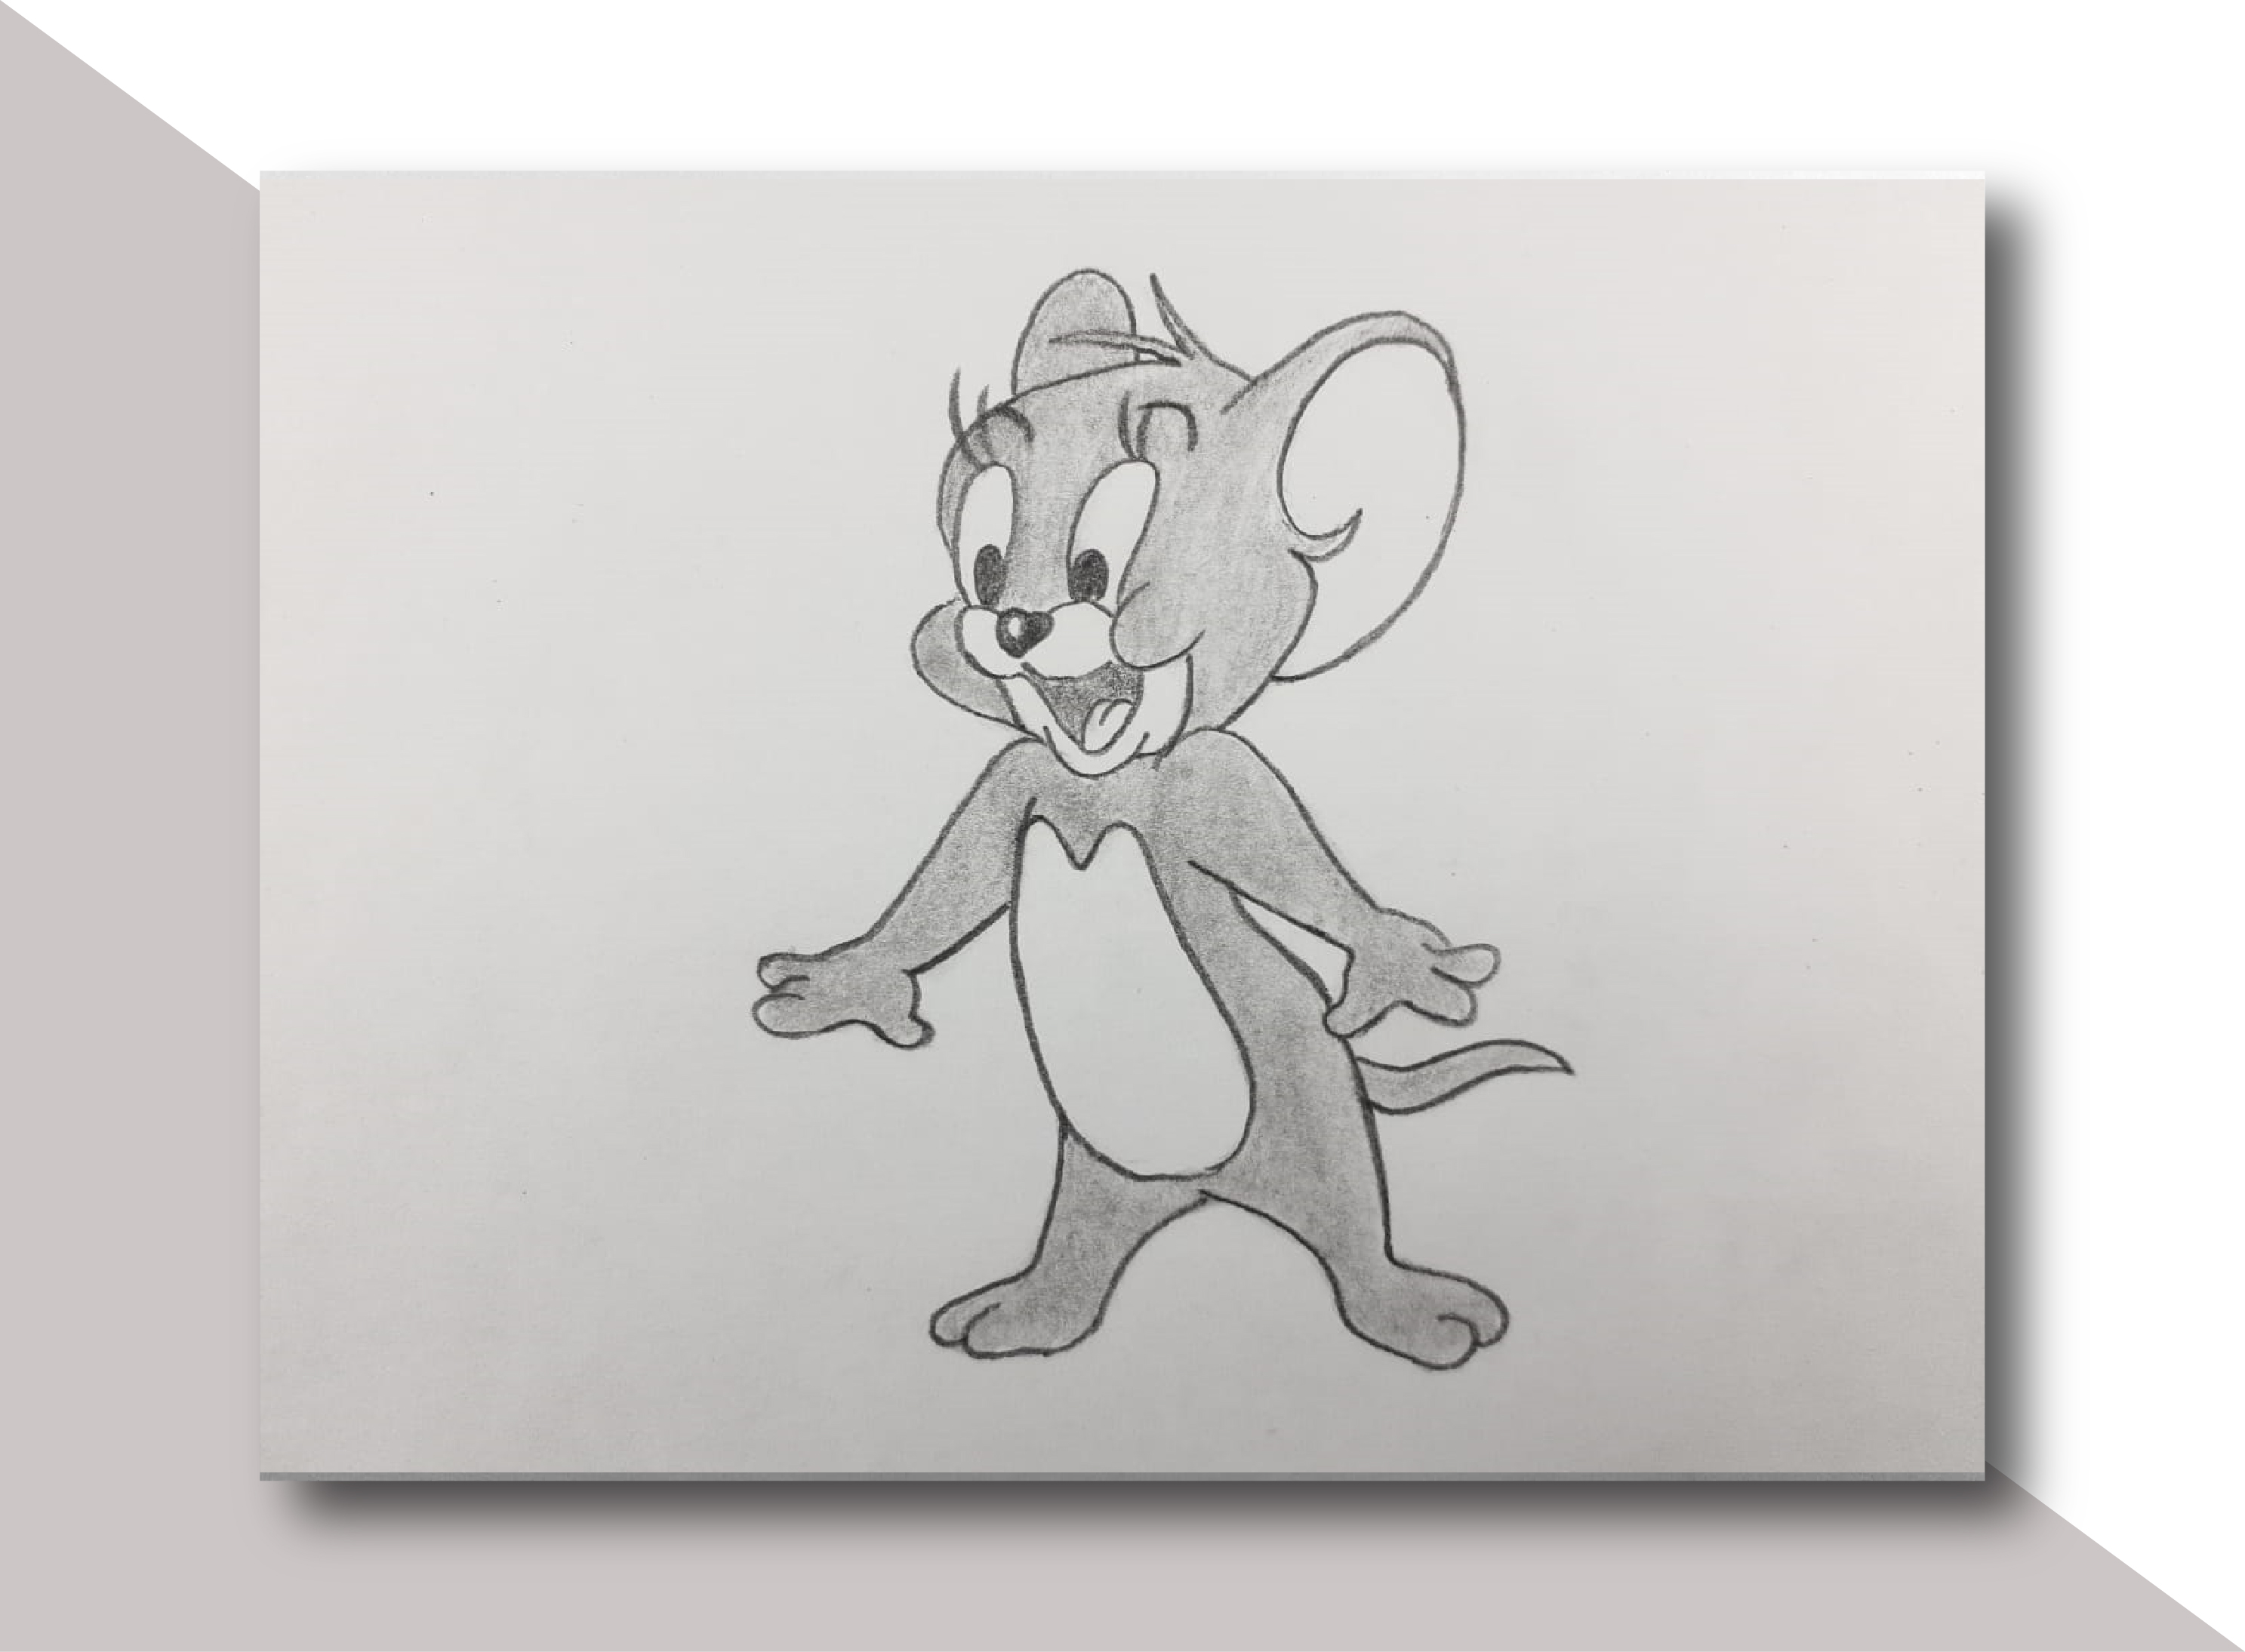 200+] Tom And Jerry Cartoon Pictures | Wallpapers.com